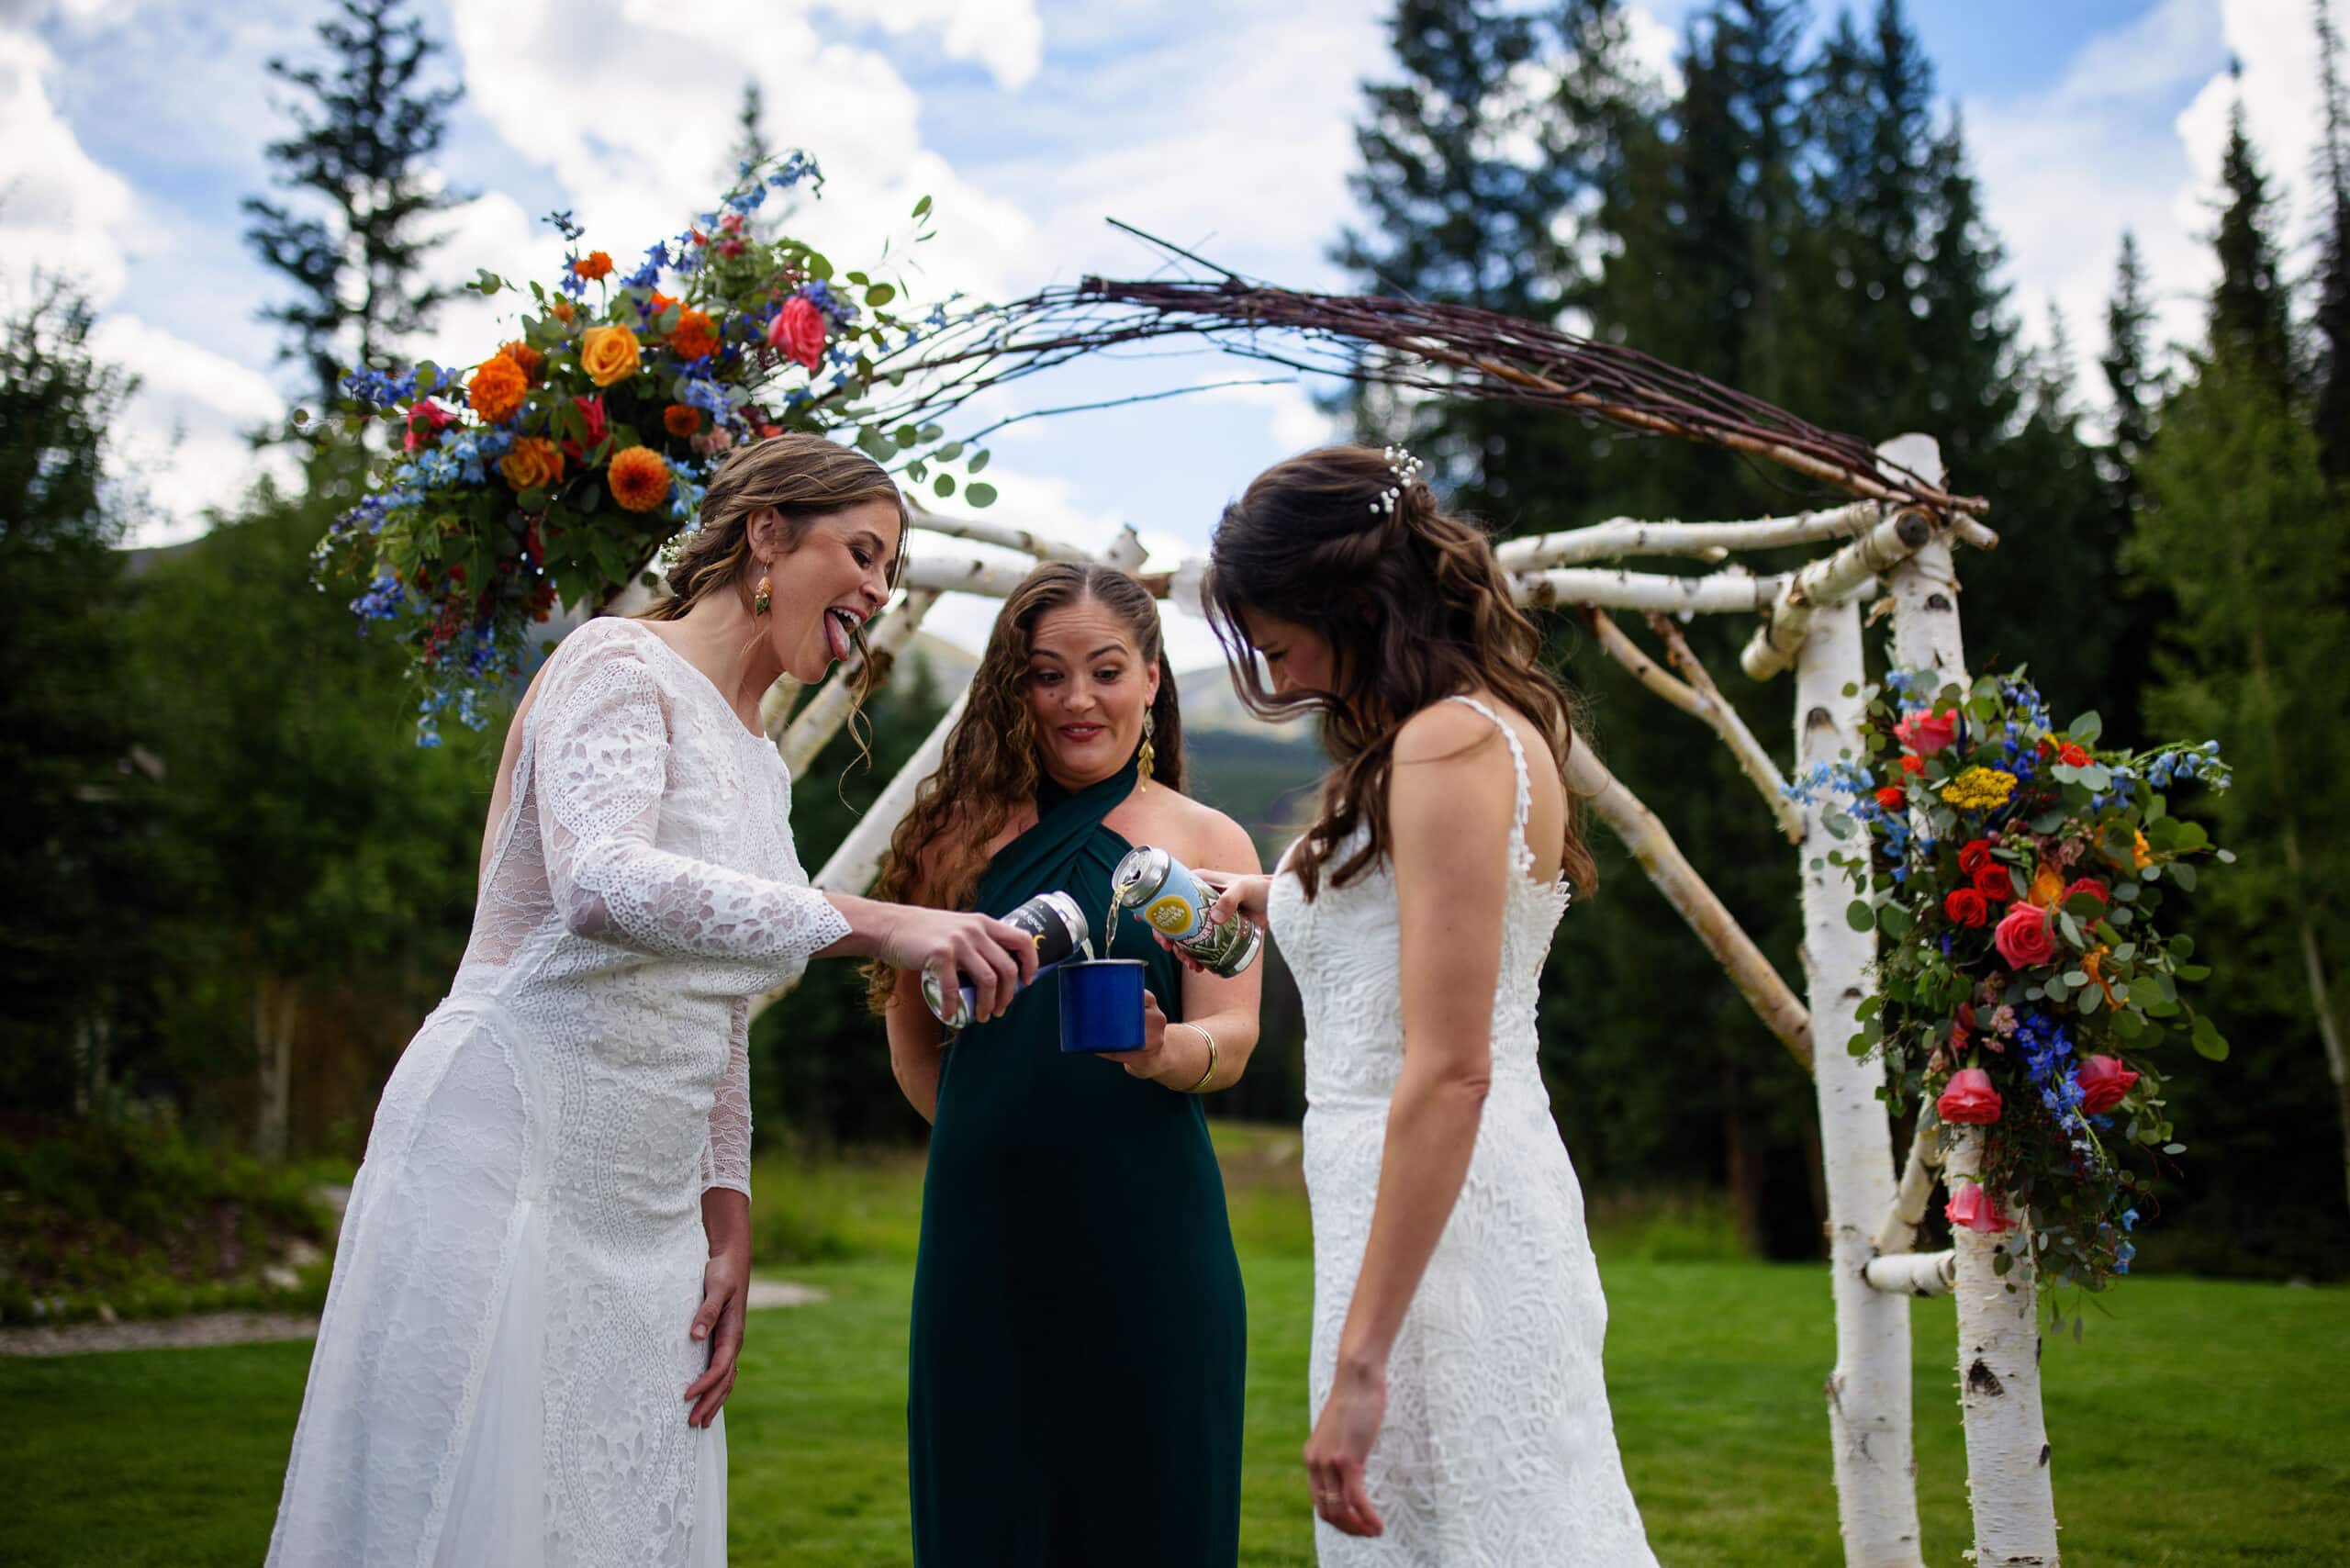 The brides pour beer into a shared cup during their ceremony